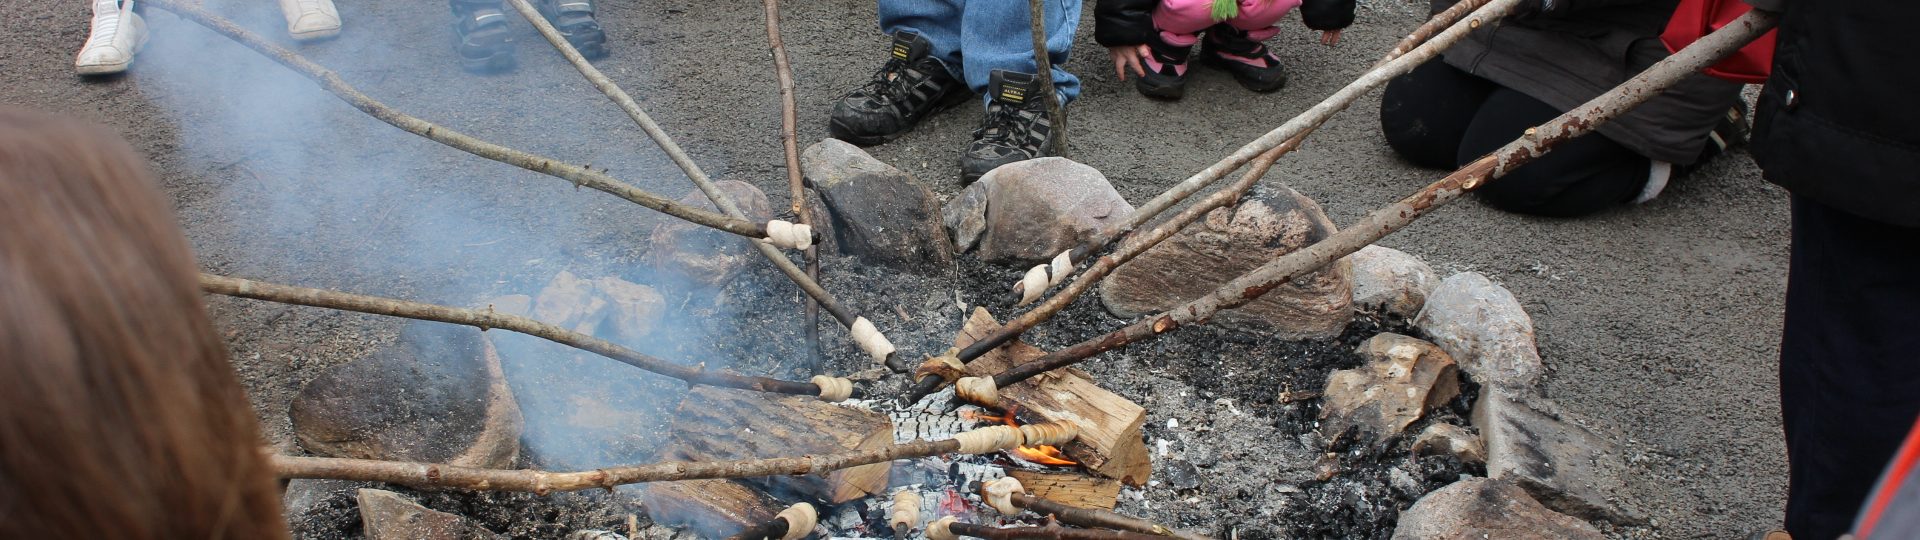 Guests making bannock over a fire